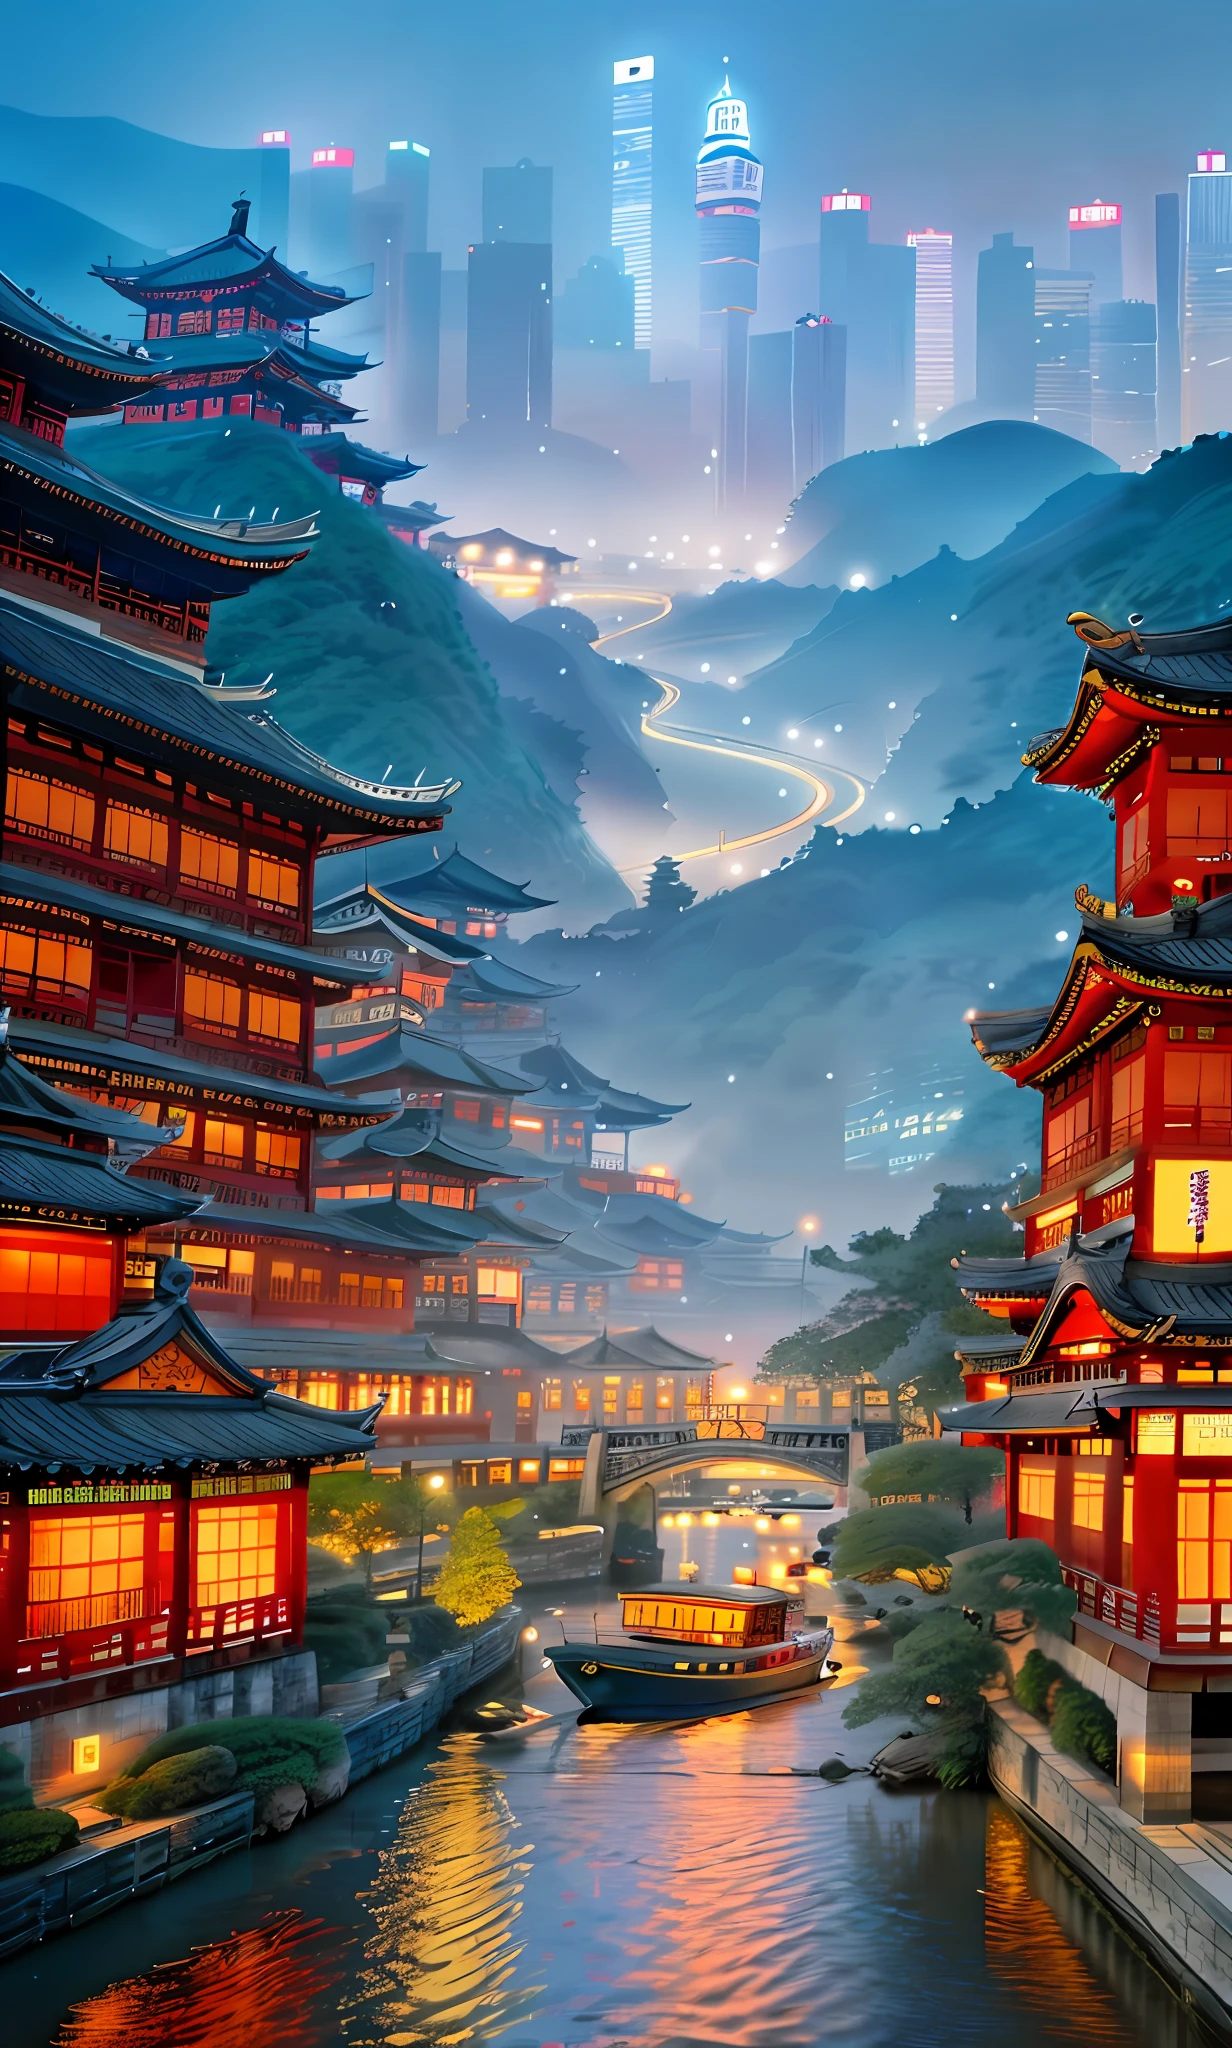 asian architecture in a city at night with a boat passing by, dreamy chinese town, ancient chinese architecture, japanese city, colorful kitsune city, digital painting of a pagoda, japanese city at night, cyberpunk chinese ancient castle, beautiful render of tang dynasty, japanese town, kyoto inspired, chinese architecture, amazing wallpaper, pagodas on hills